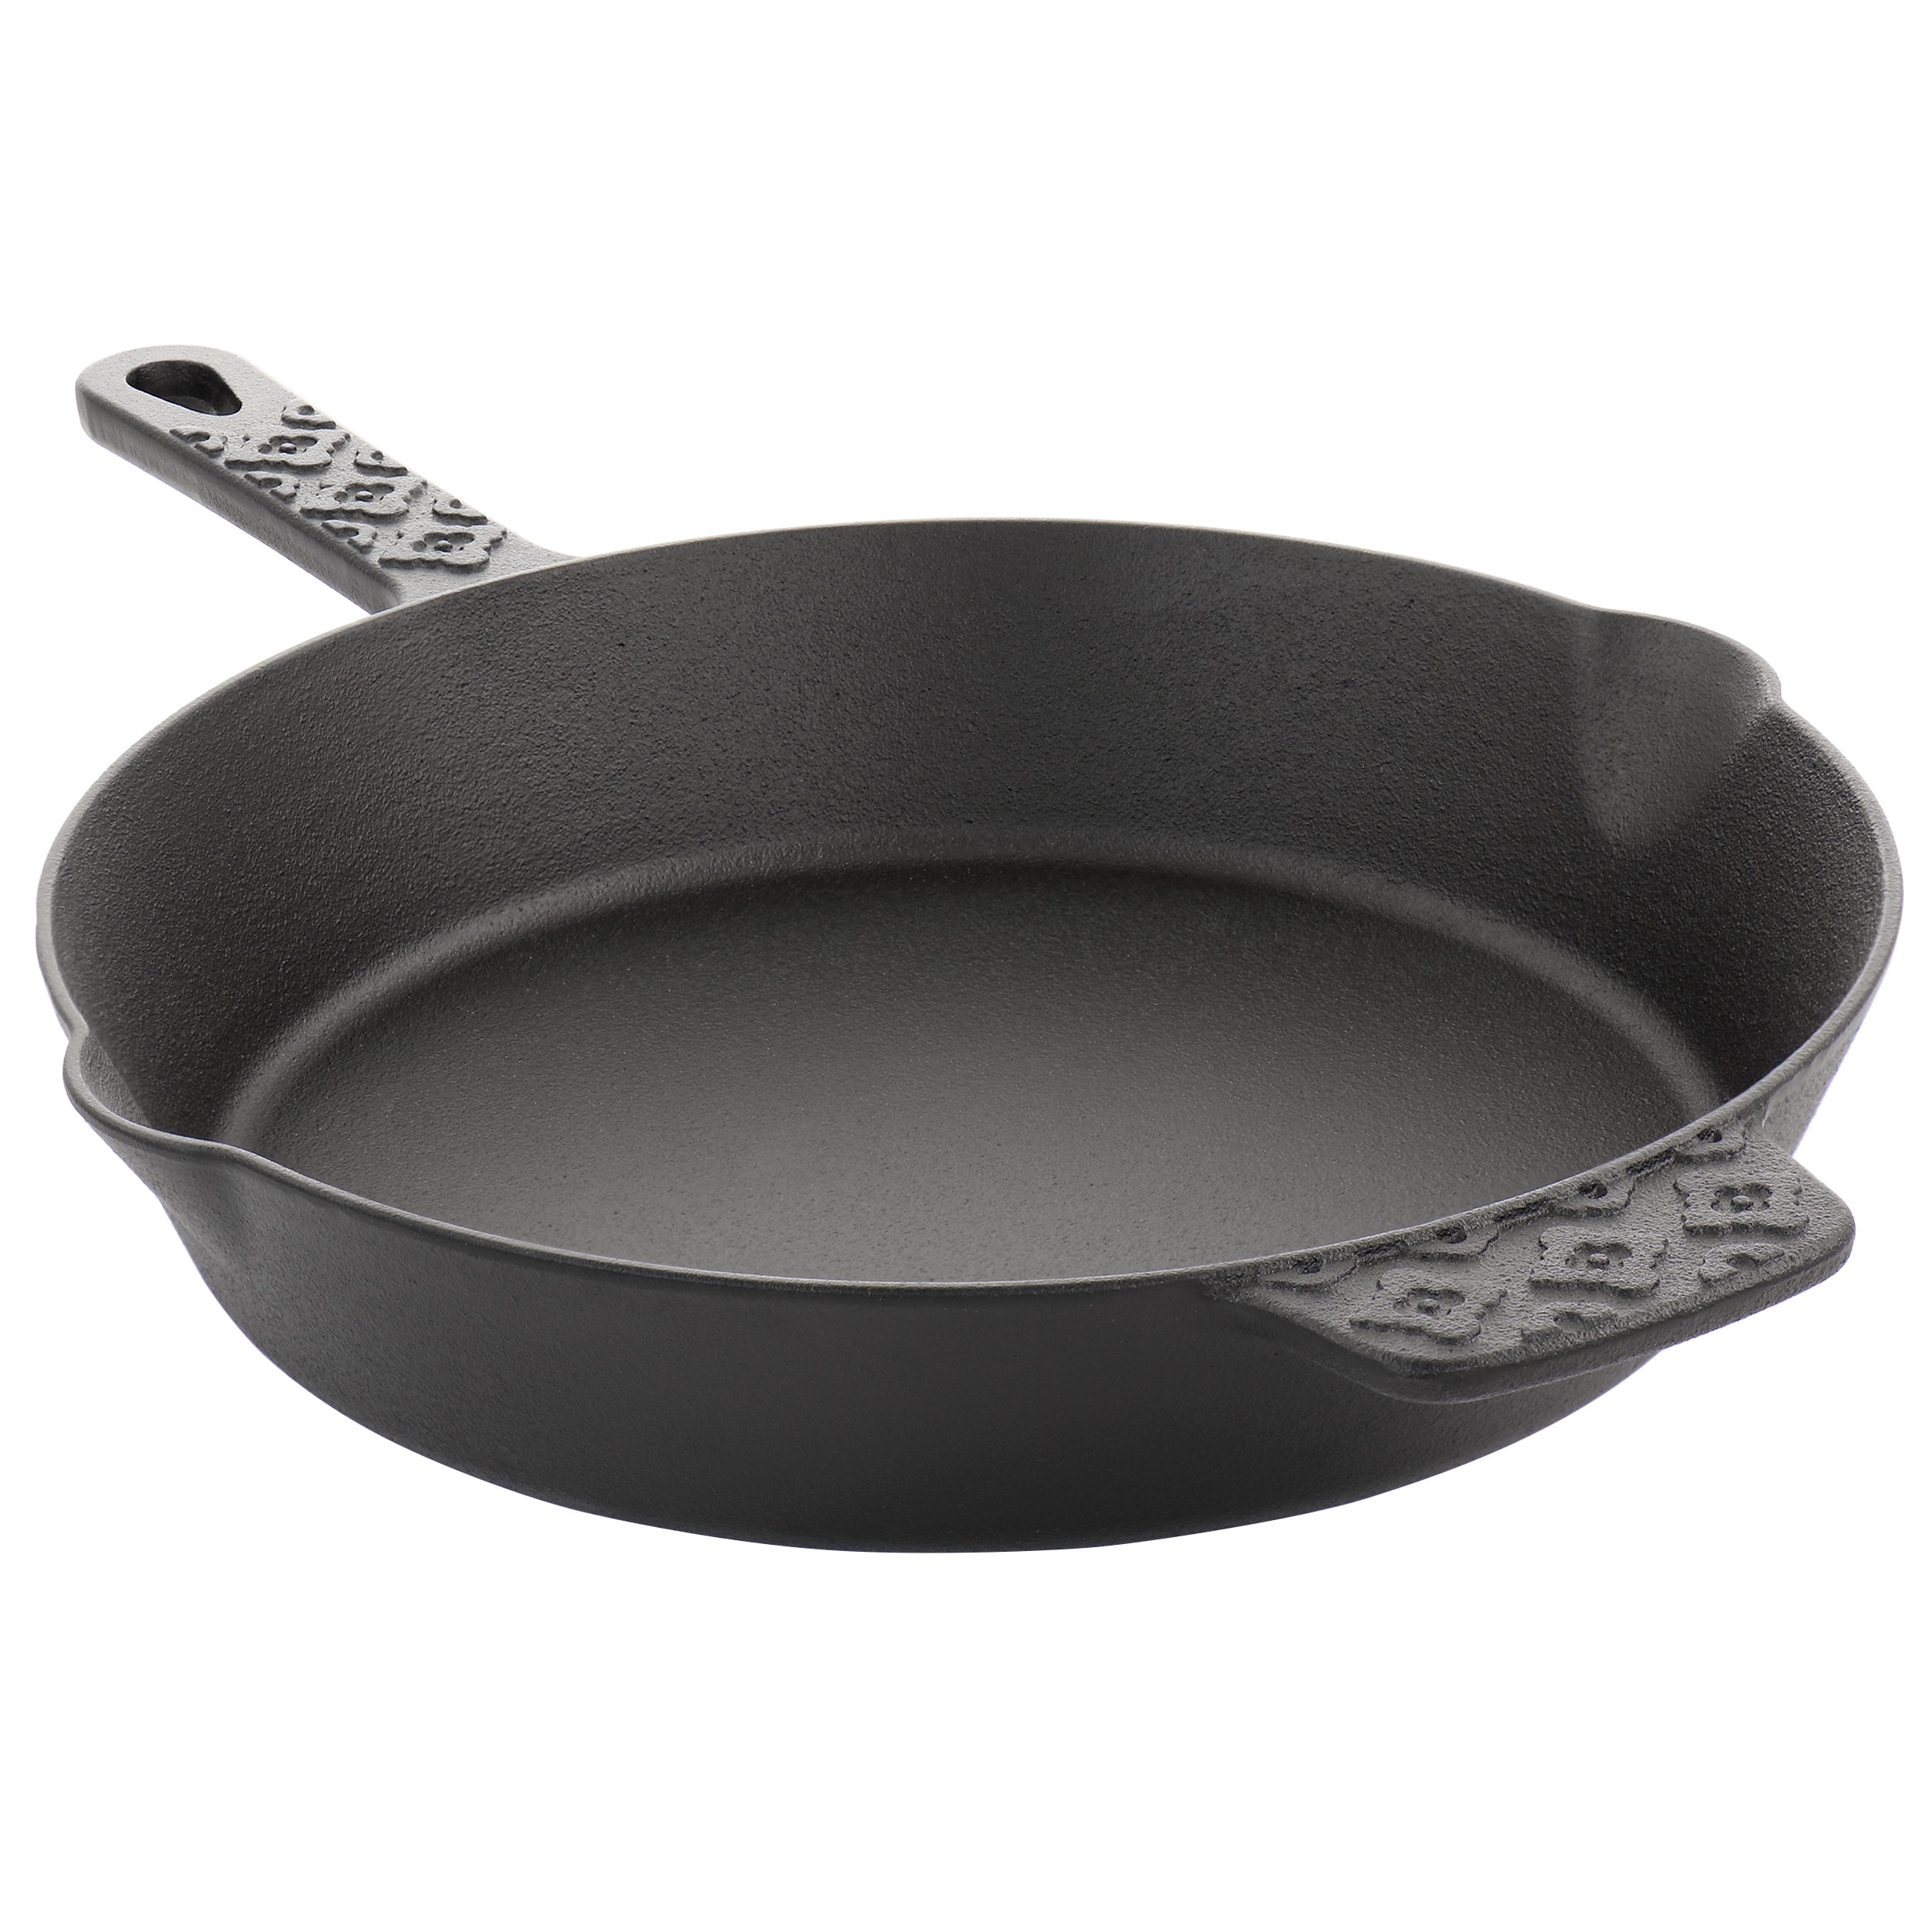 https://ak1.ostkcdn.com/images/products/is/images/direct/0bd5fa4174f20b325c54fc0b1e2ce4bd5fa16828/12-Inch-Cast-Iron-Skillet-with-Pouring-Spouts.jpg